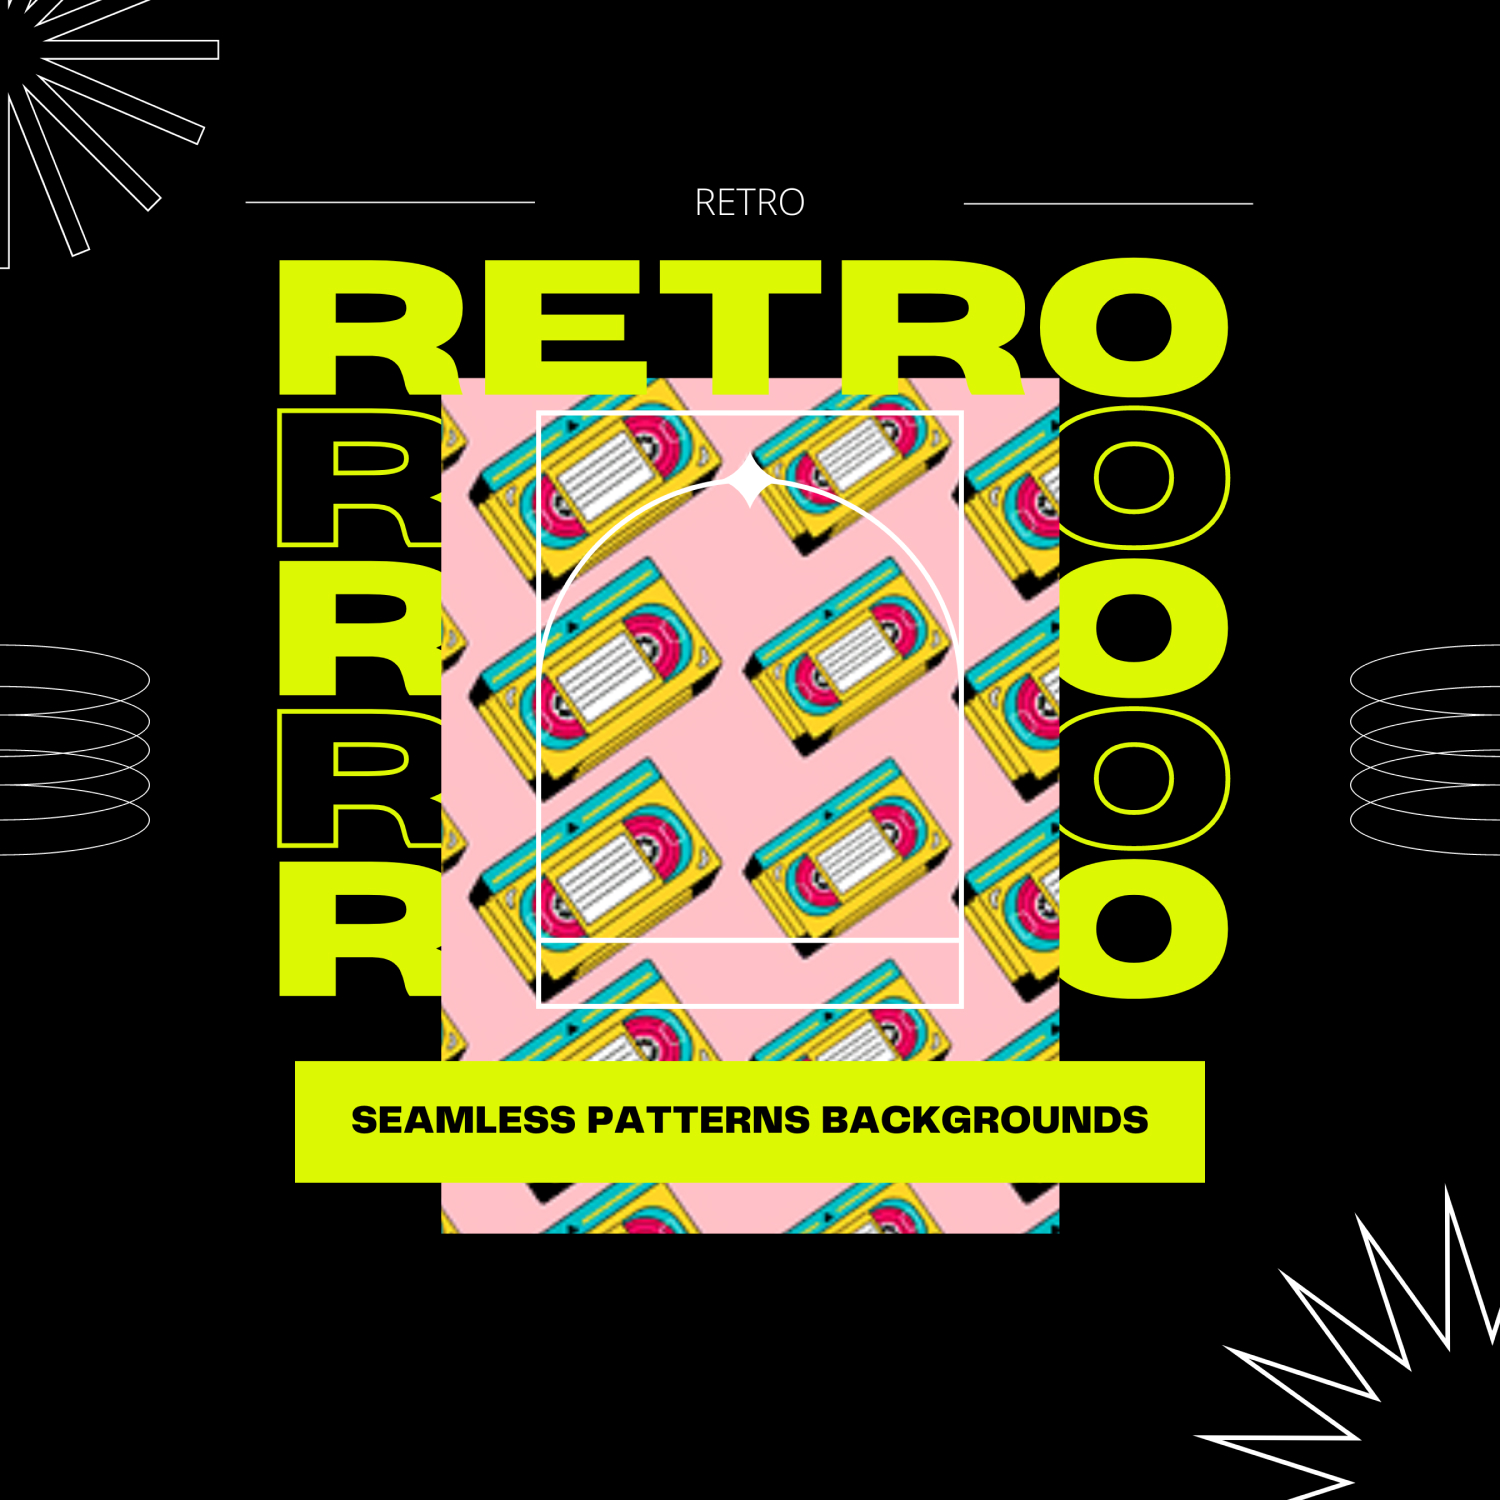 12 Retro Seamless Patterns/Backgrounds.